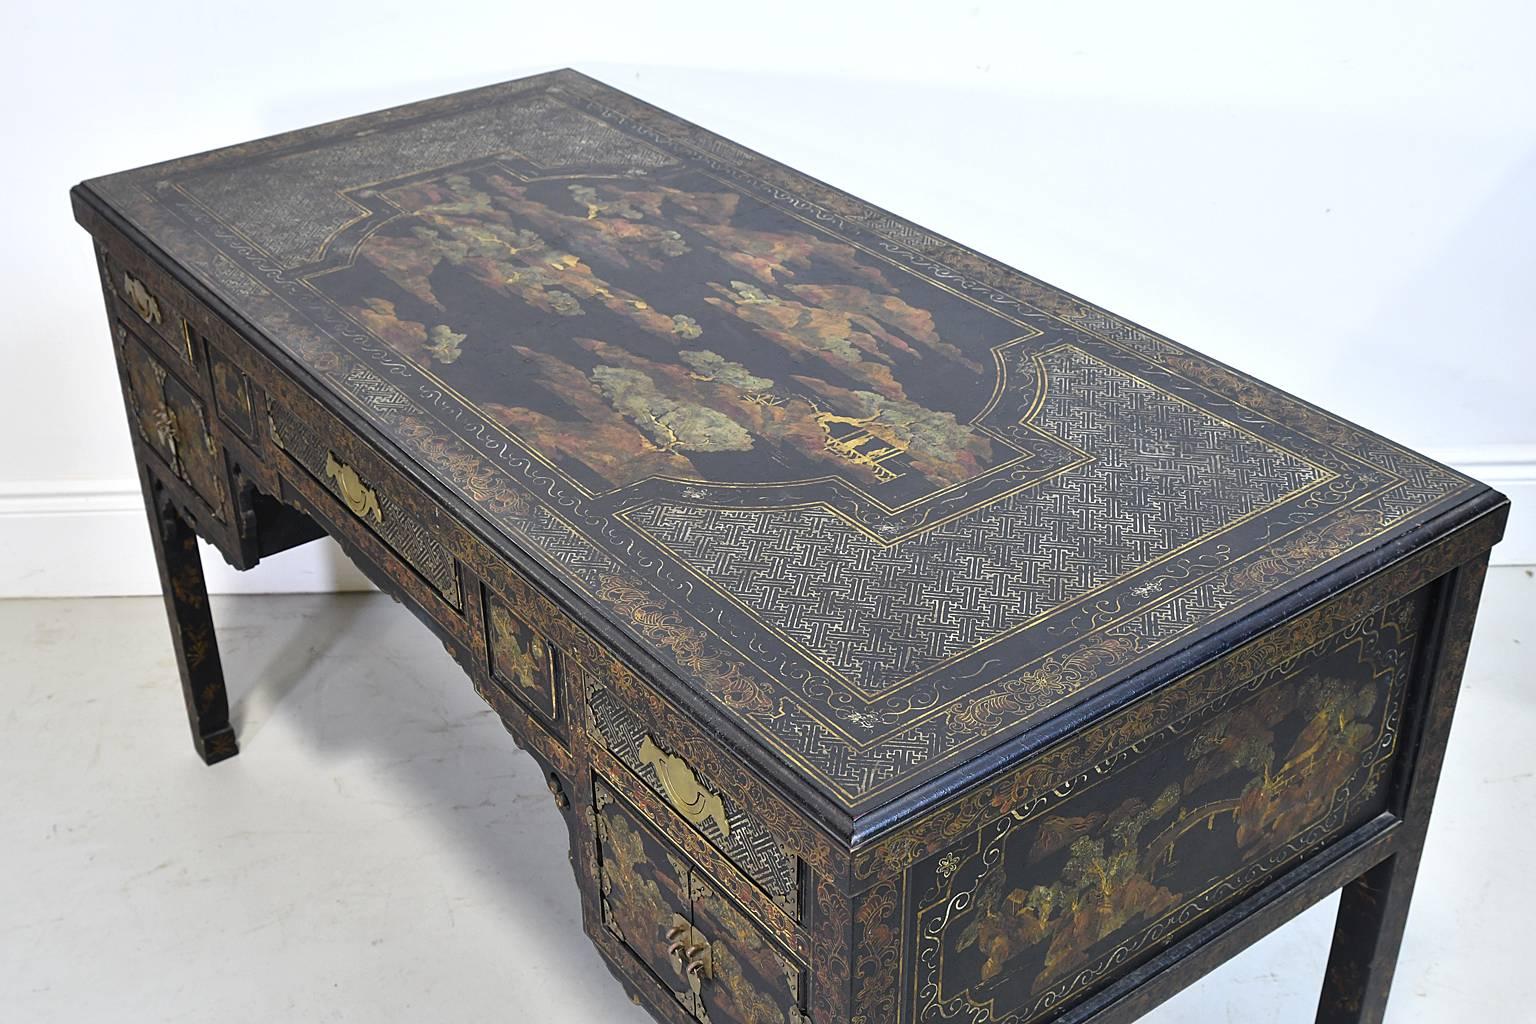 Polychromed 20th Century Queen Anne Revival English Chinoiserie Desk by John Widdicomb